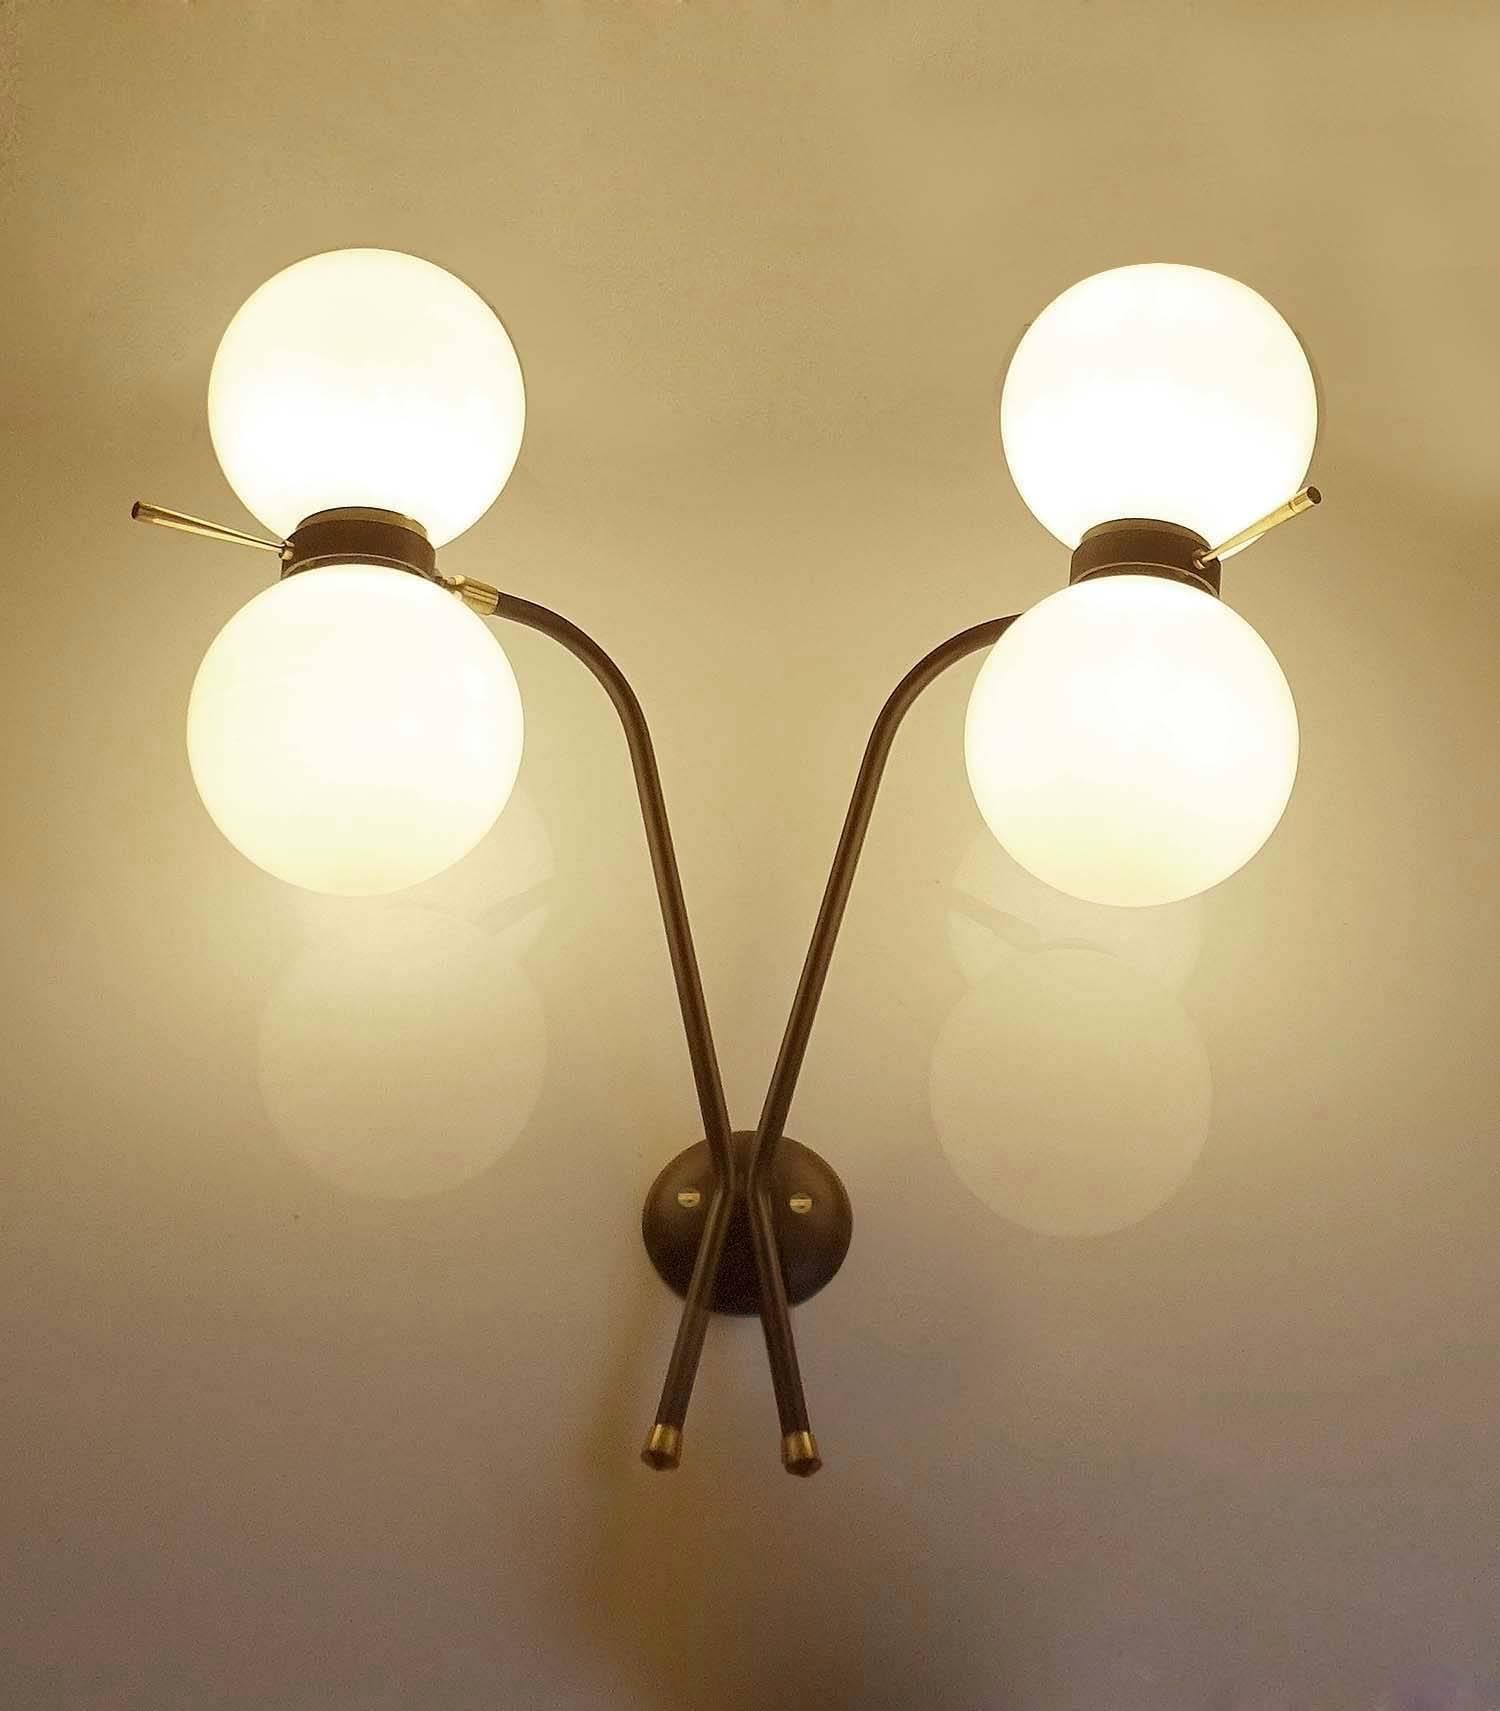 All our light´s electricals are professionally checked and tested for worldwide use
Pair of exceptional, large midcentury sconces by Maison Arlus (Arts et Lustres), France, circa 1965, featuring an X-shaped black enameled structure, jointed ring